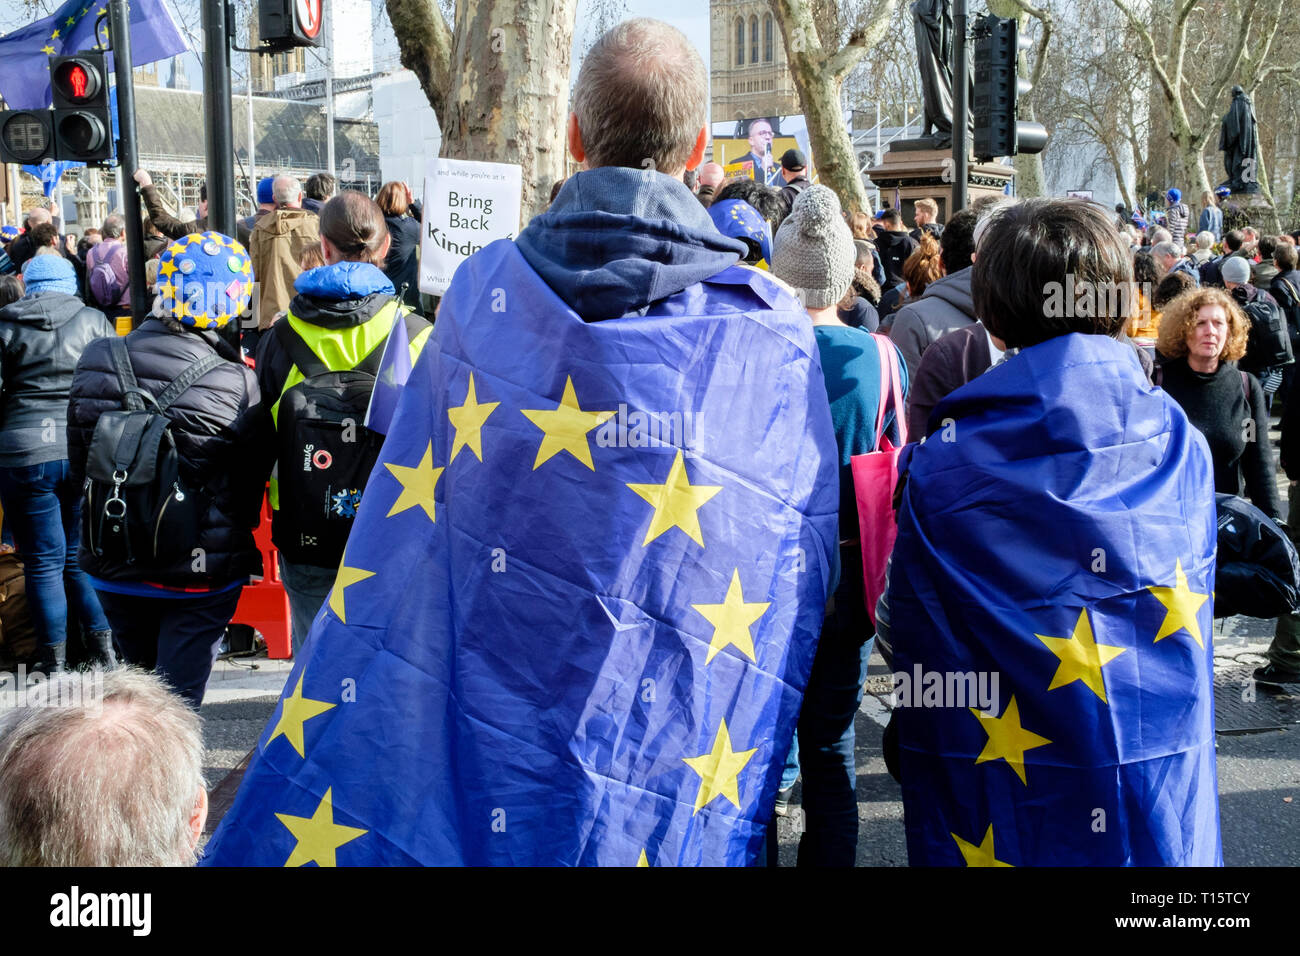 London, UK. 23rd March 2019. Hundreds of thousands of people march through central London demanding a second vote on the UK's membership of the European Union. Pictured: Marchers gather to listen to speeches in Parliament Square. Credit: mark phillips/Alamy Live News Stock Photo